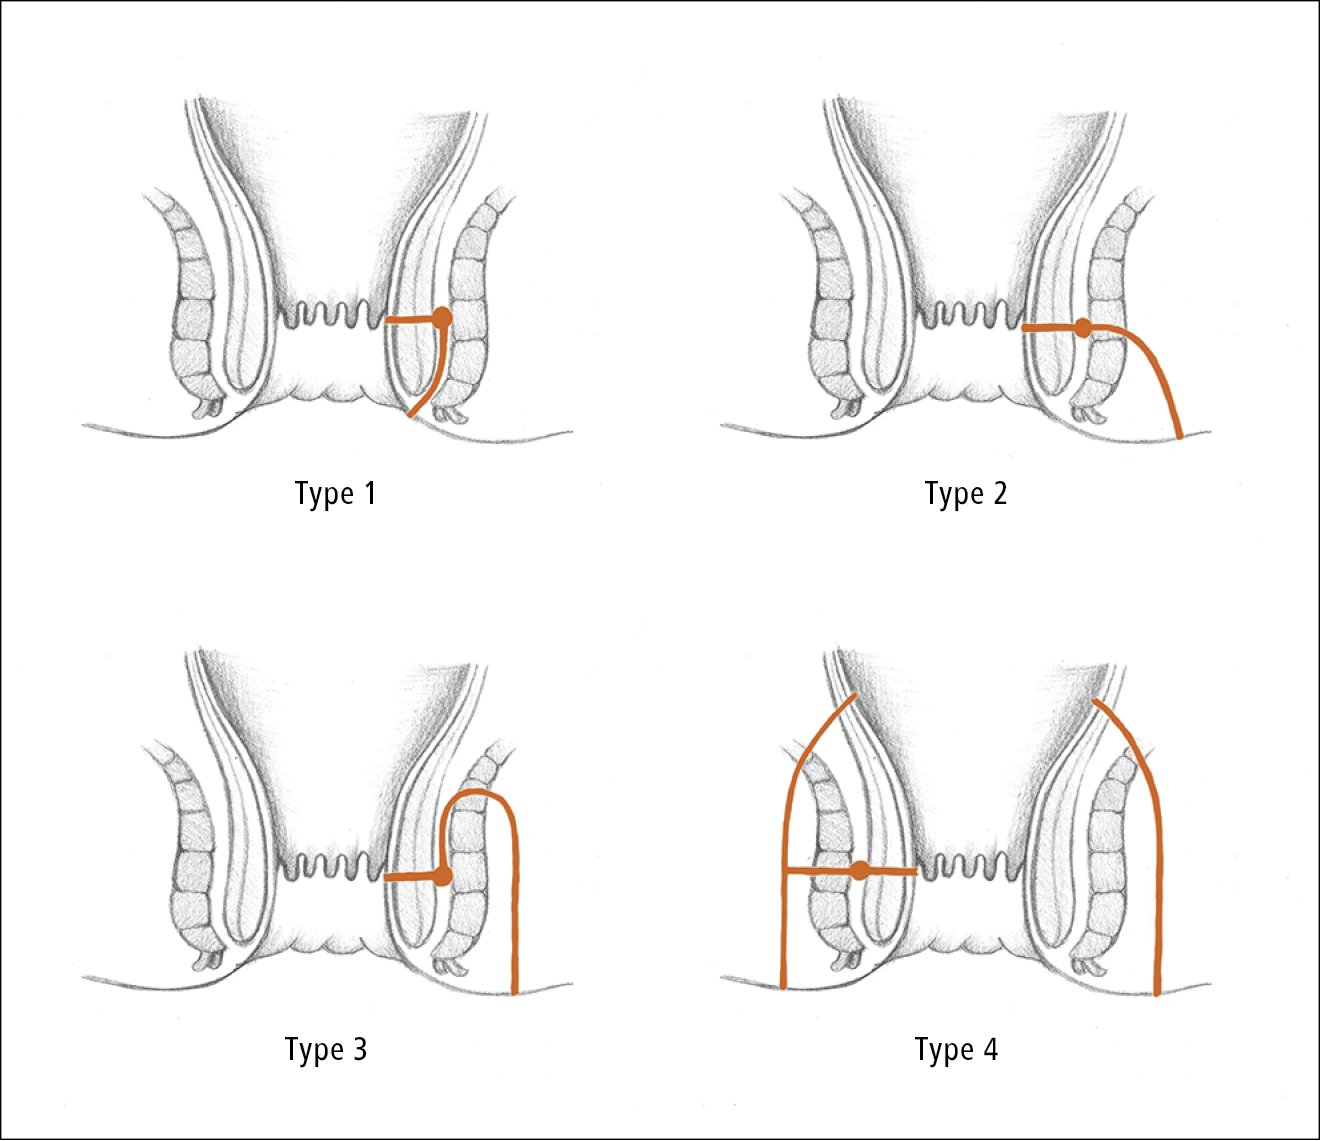 Figure 031_4_7088.  Types of fistula in ano.  Type 1 , intersphincteric fistula.  Type 2 , transsphincteric fistula.  Type 3 , suprasphincteric fistula.  Type 4 , extrasphincteric fistula.  Illustration courtesy of Dr Shannon Zhang.  